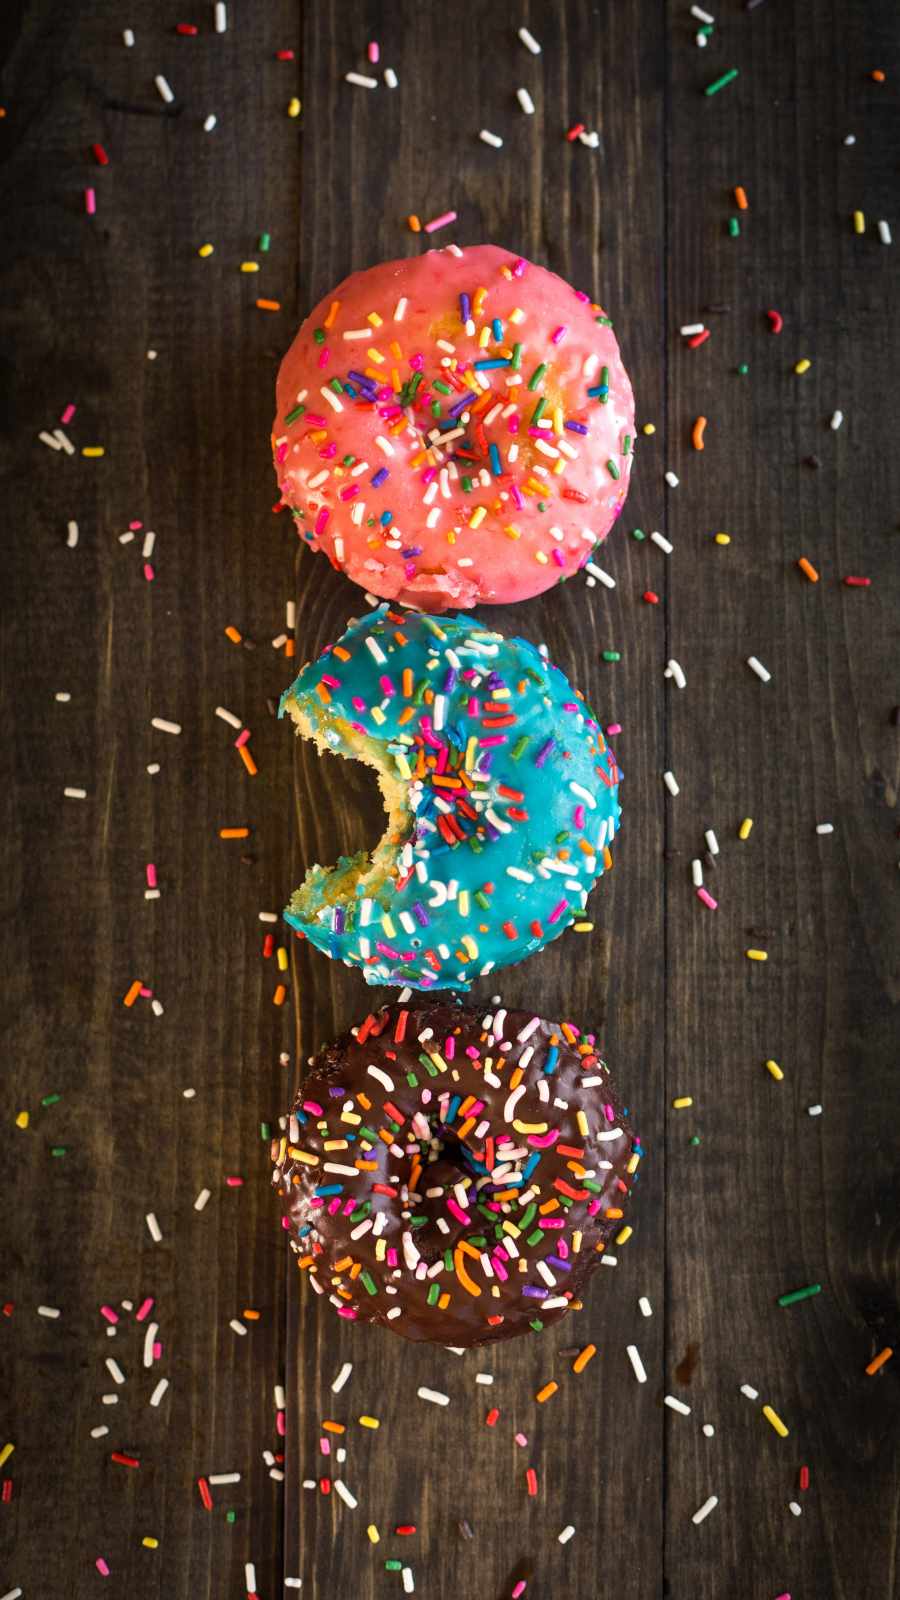 Donuts 4K IPhone Wallpaper - IPhone Wallpapers : iPhone Wallpapers